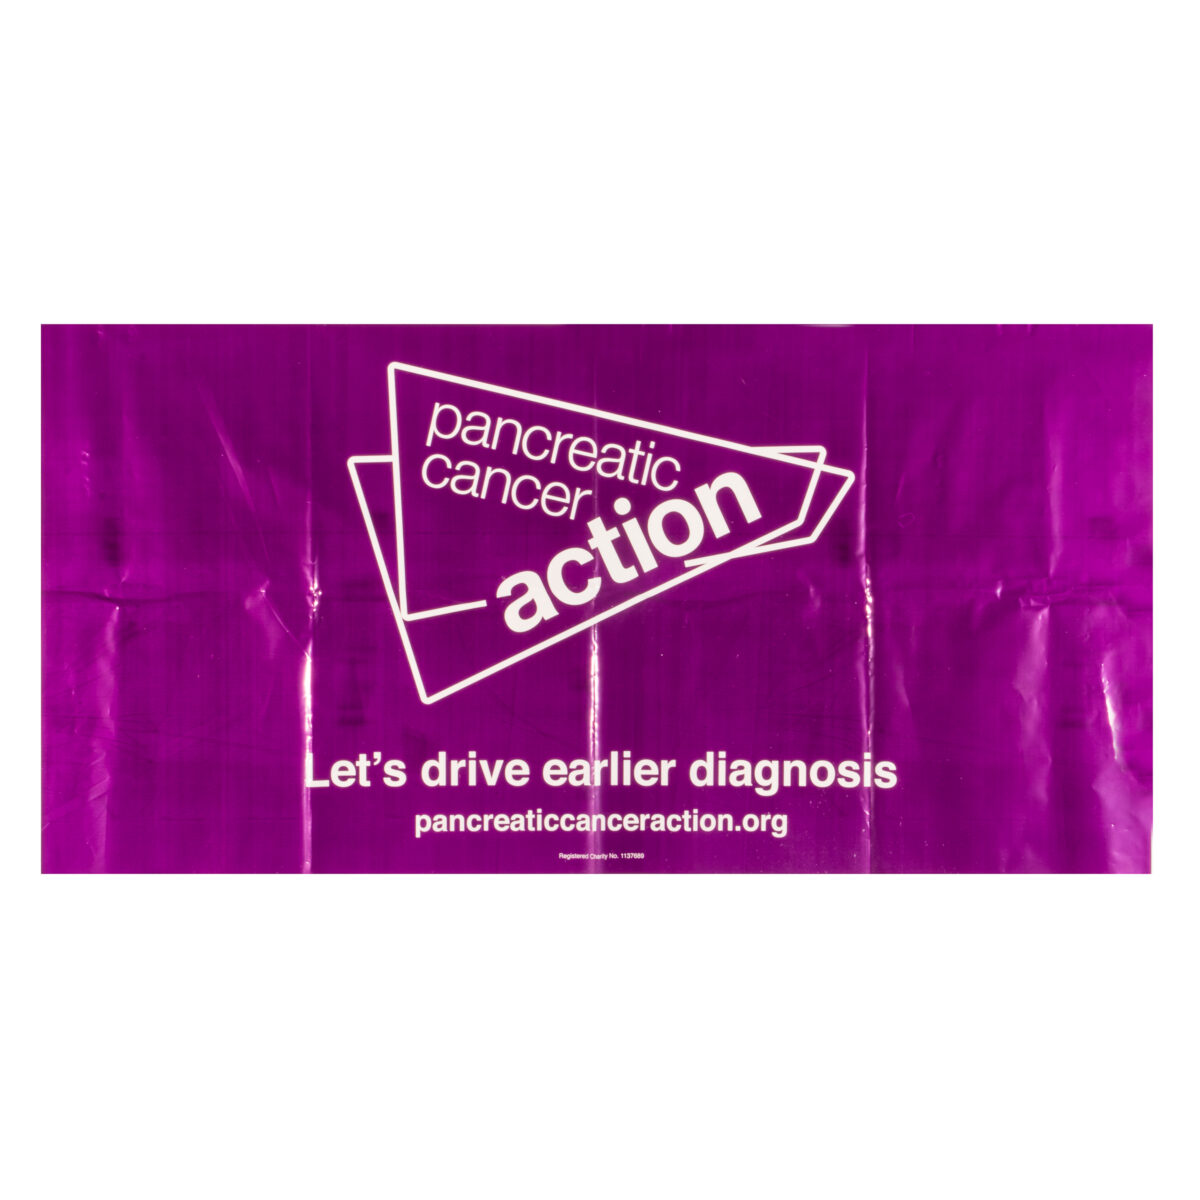 Pancreatic Cancer Action event banner